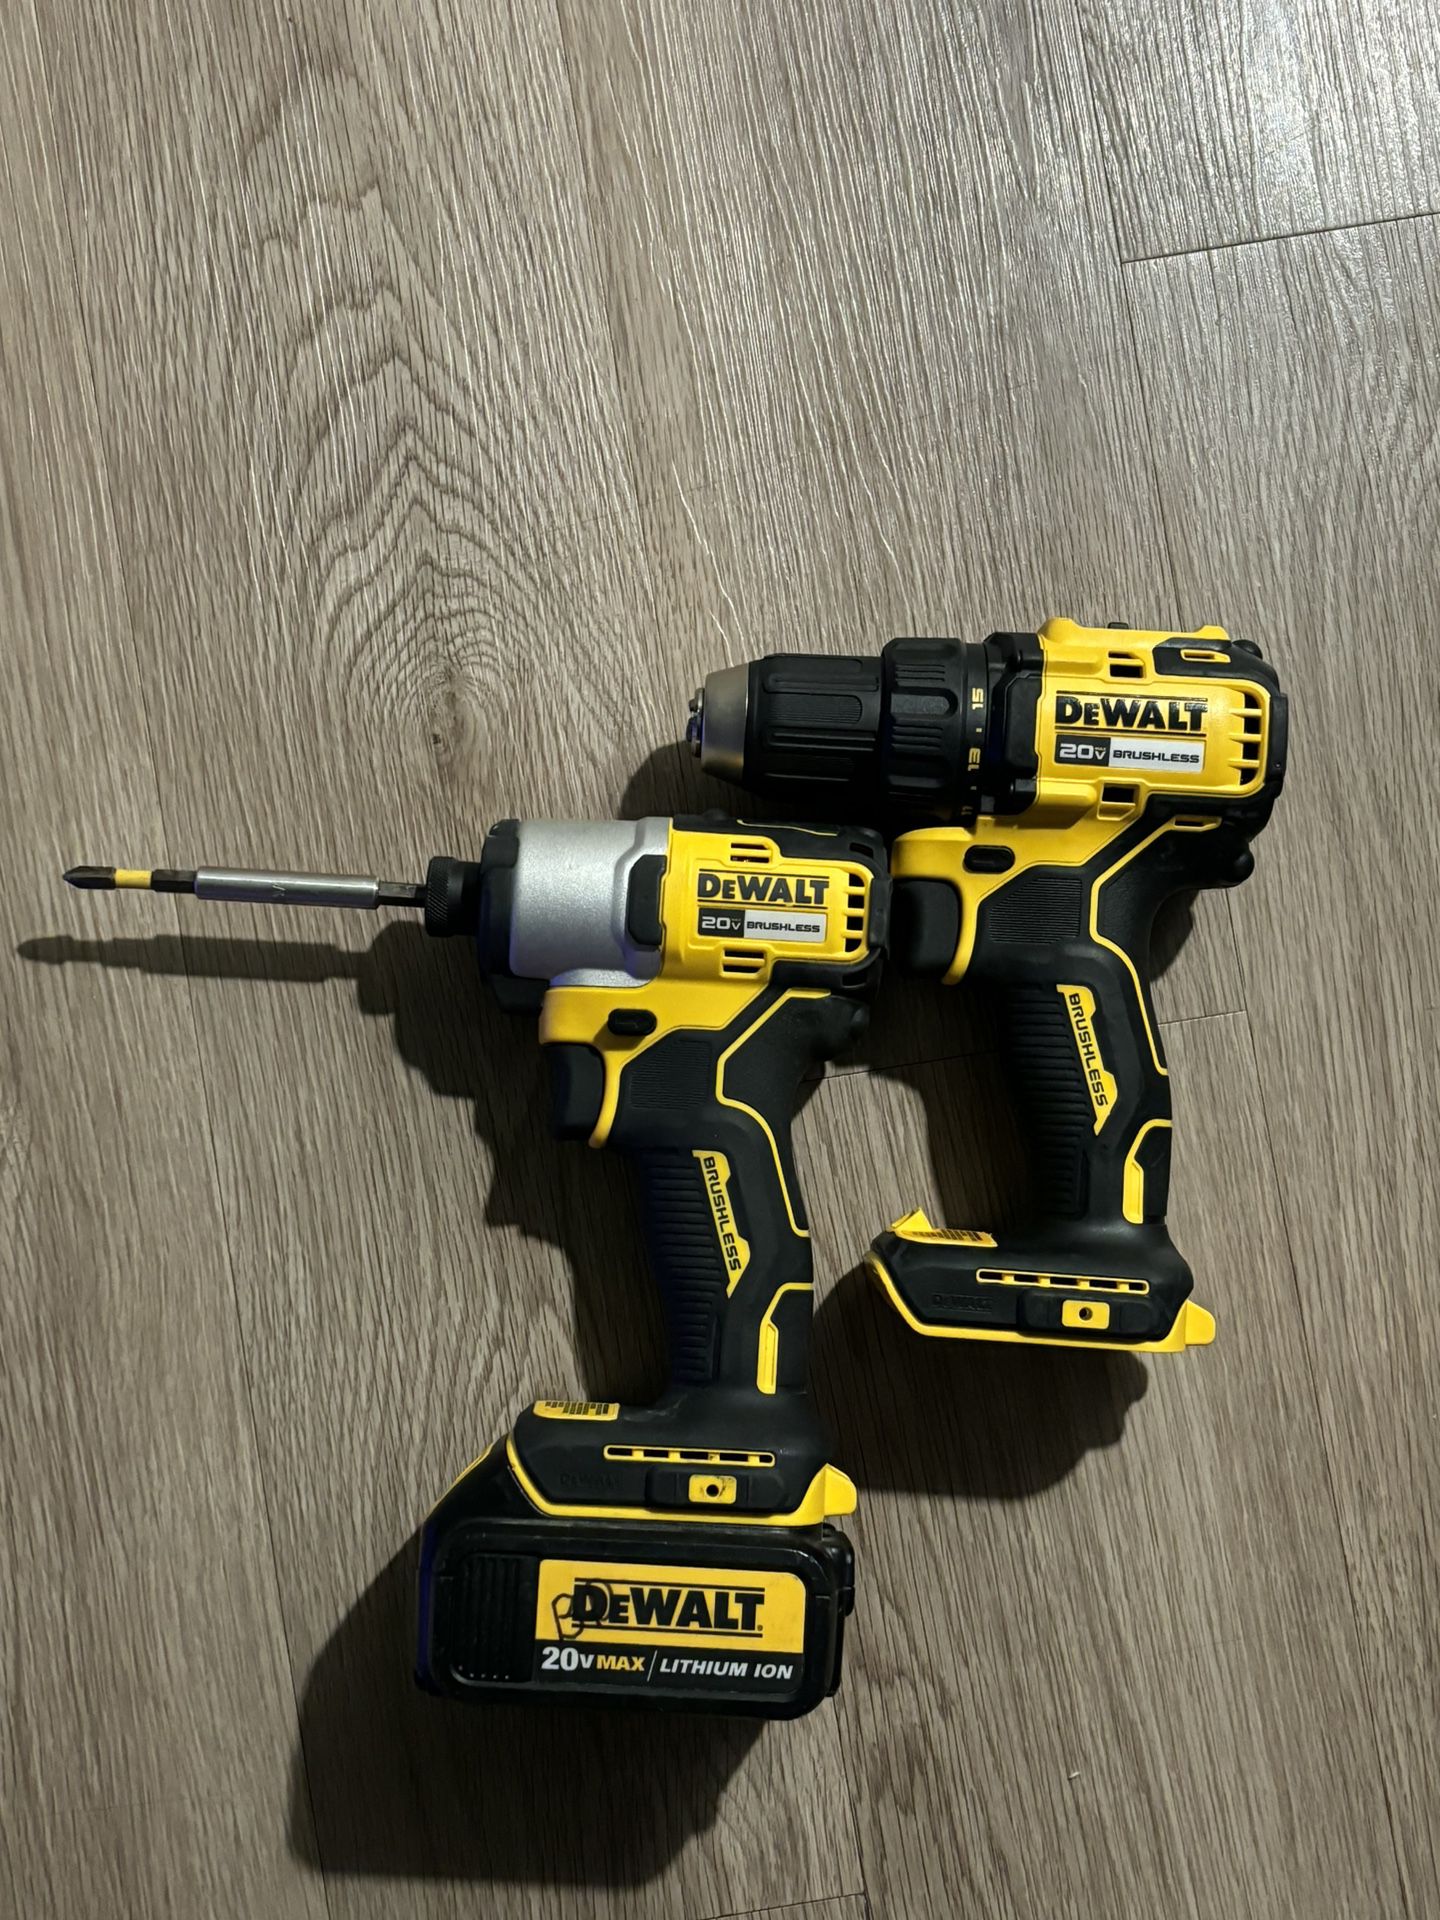 Dewalt Drill And Impact Combo